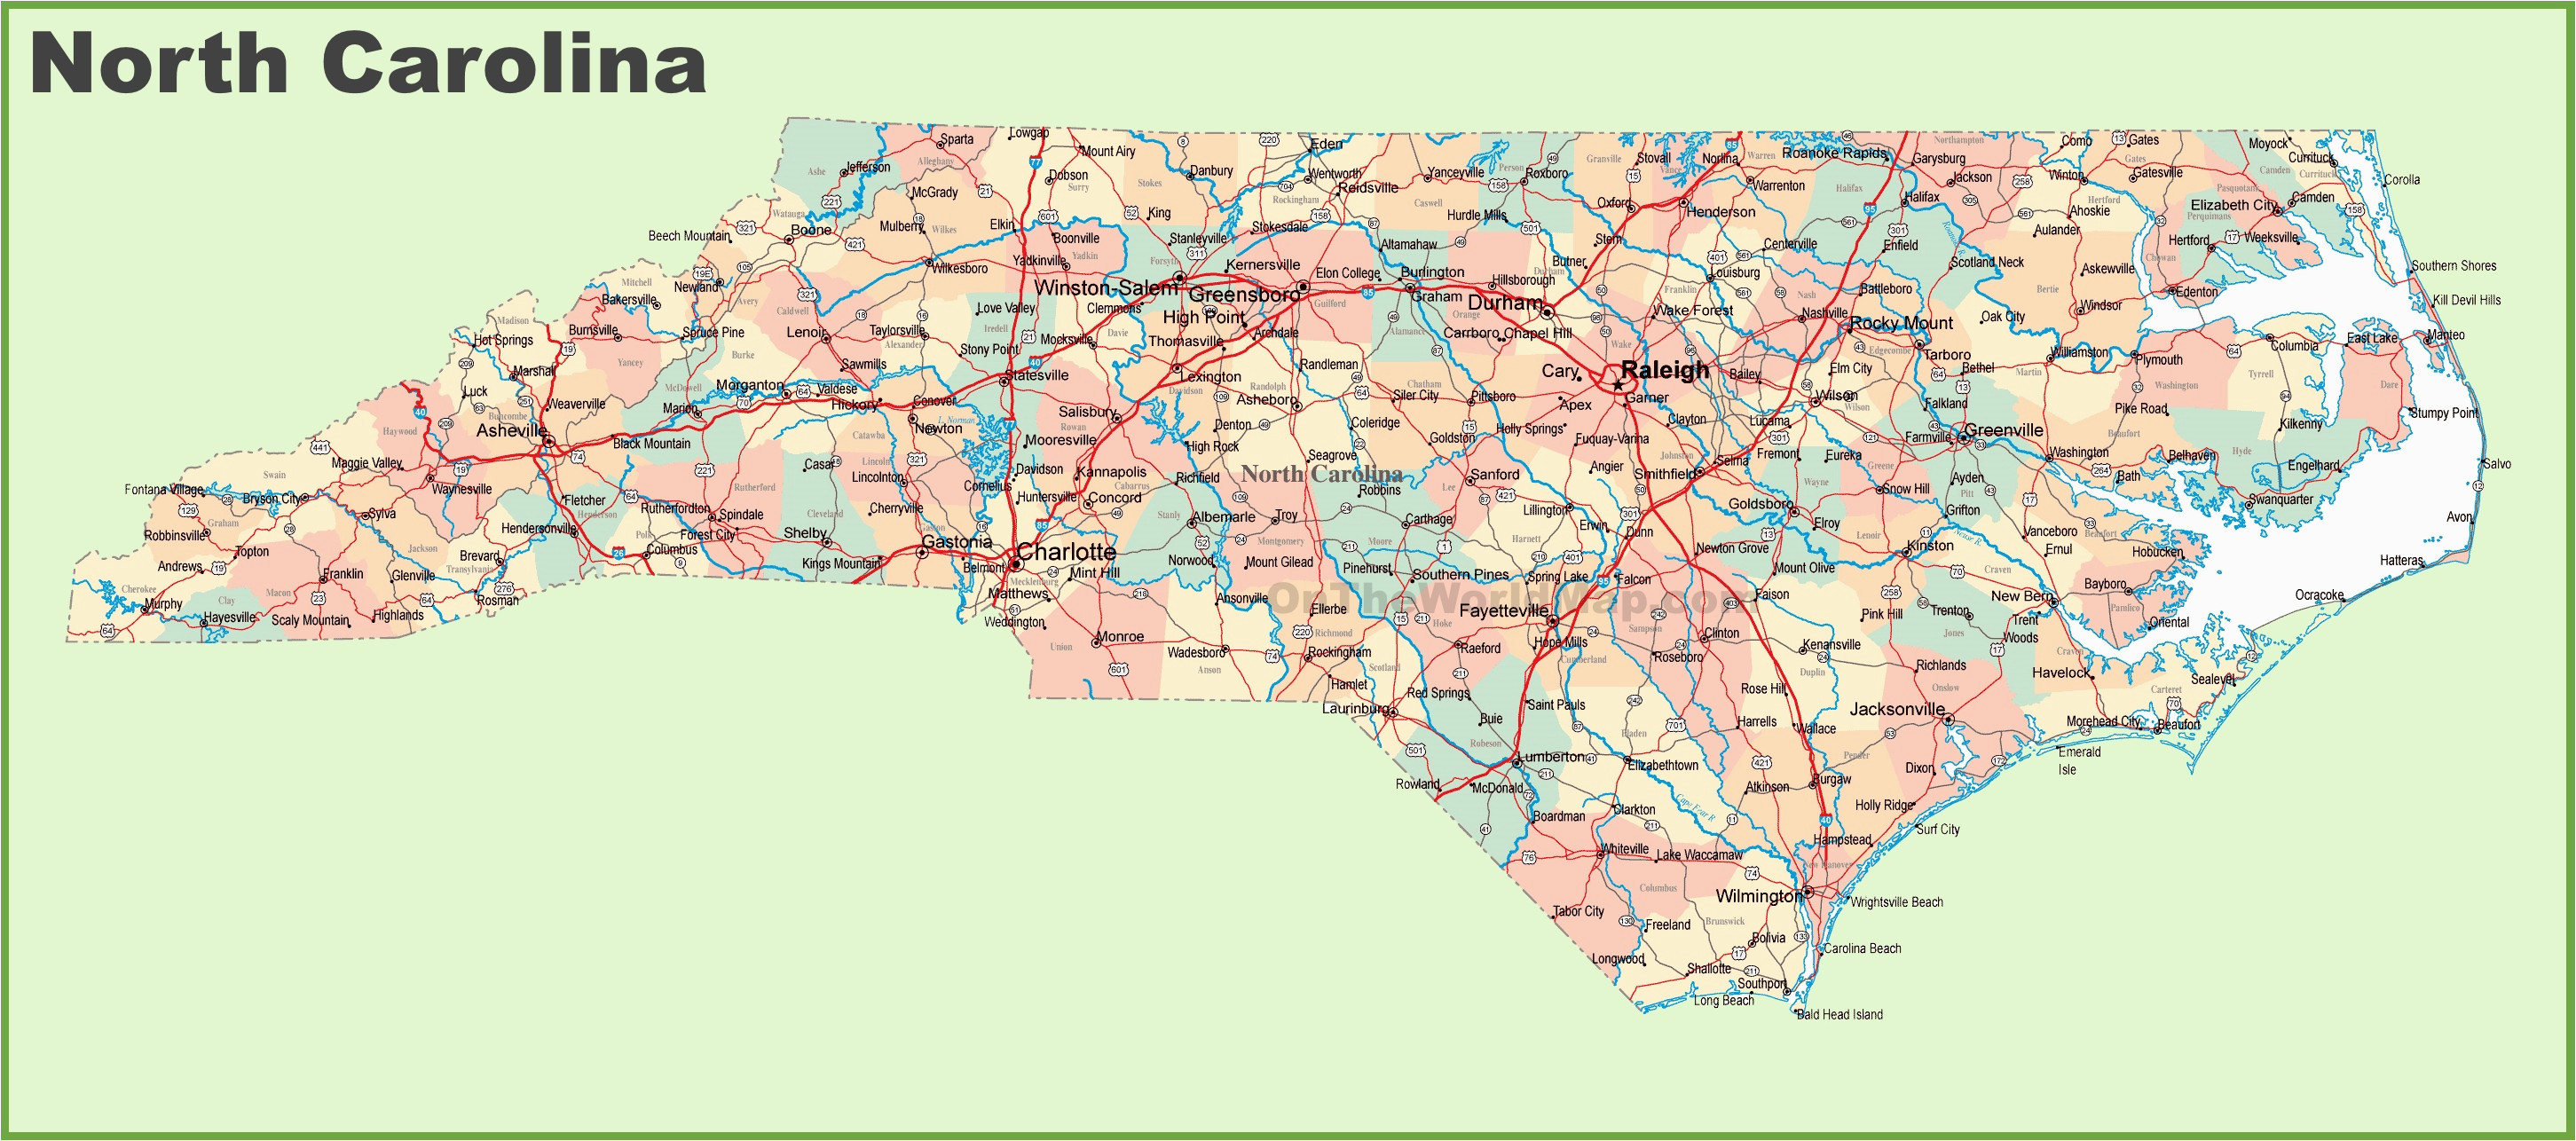 map of nc towns luxury mb roads map download wallpaper high full hd